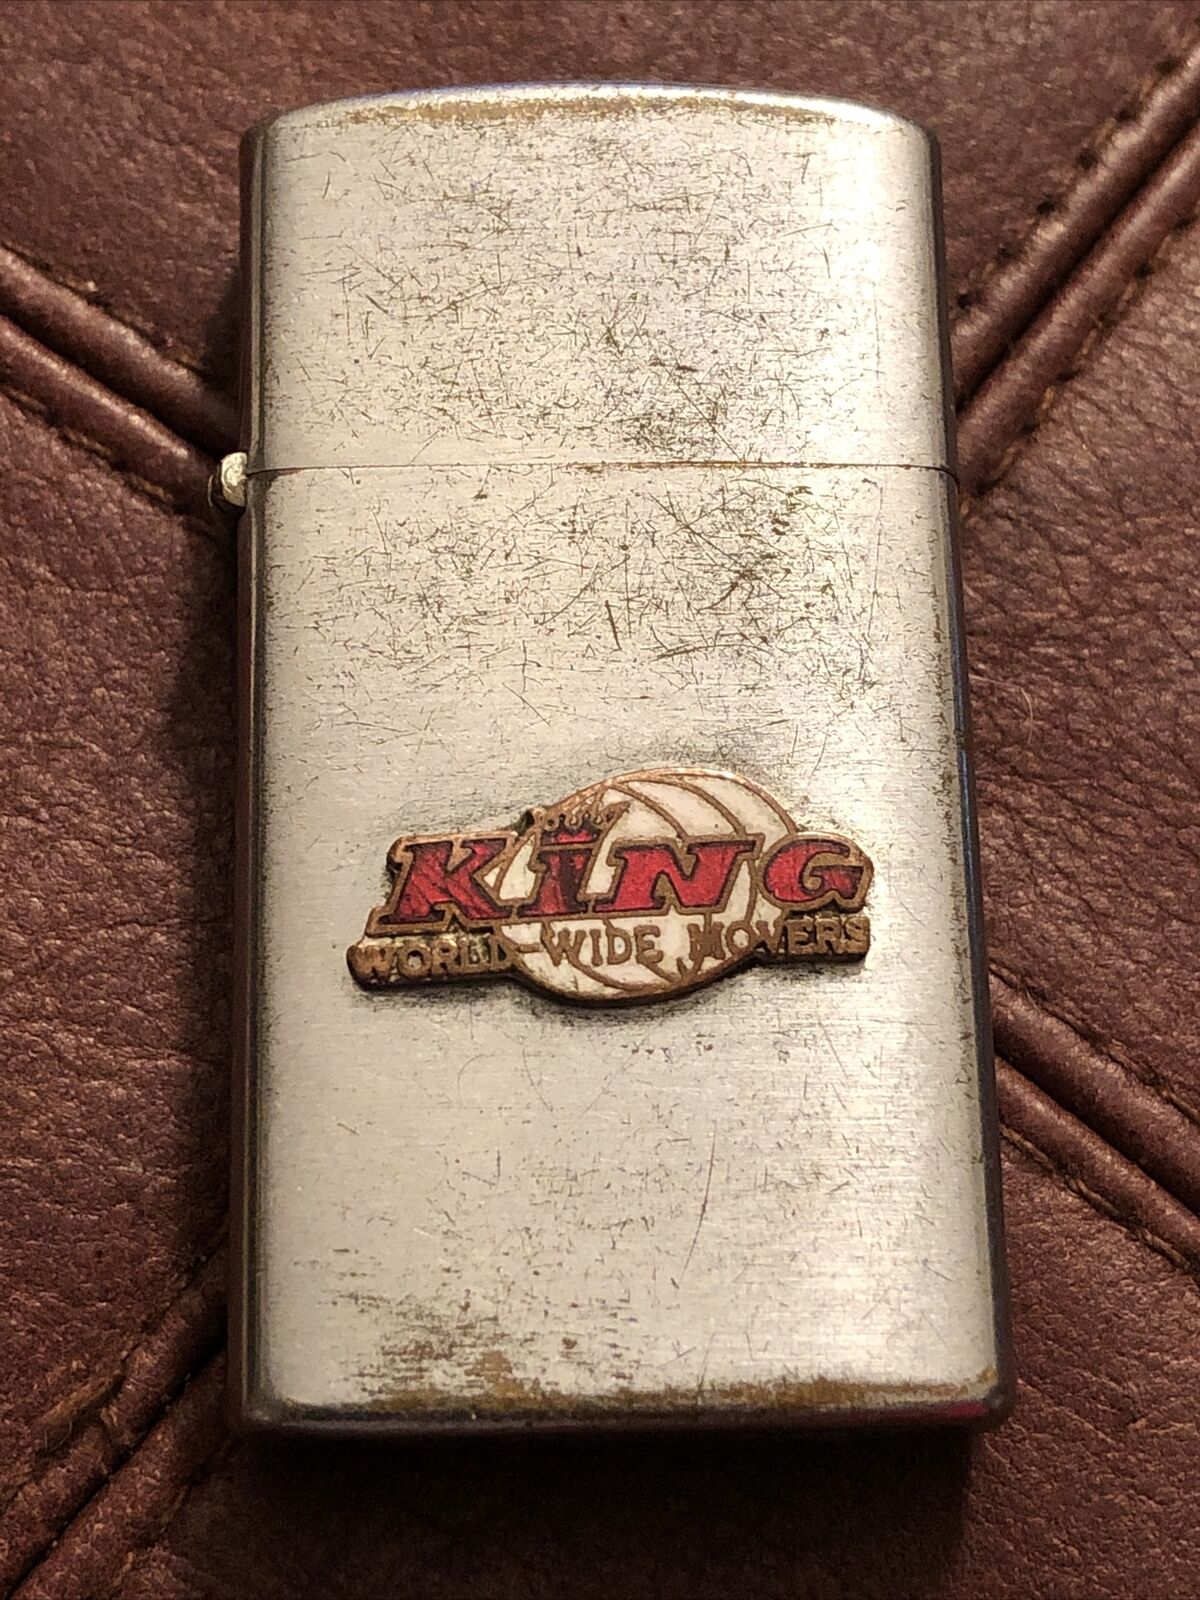 Vintage Advertising Lighter KING Workd Wide Movers - Great Logo